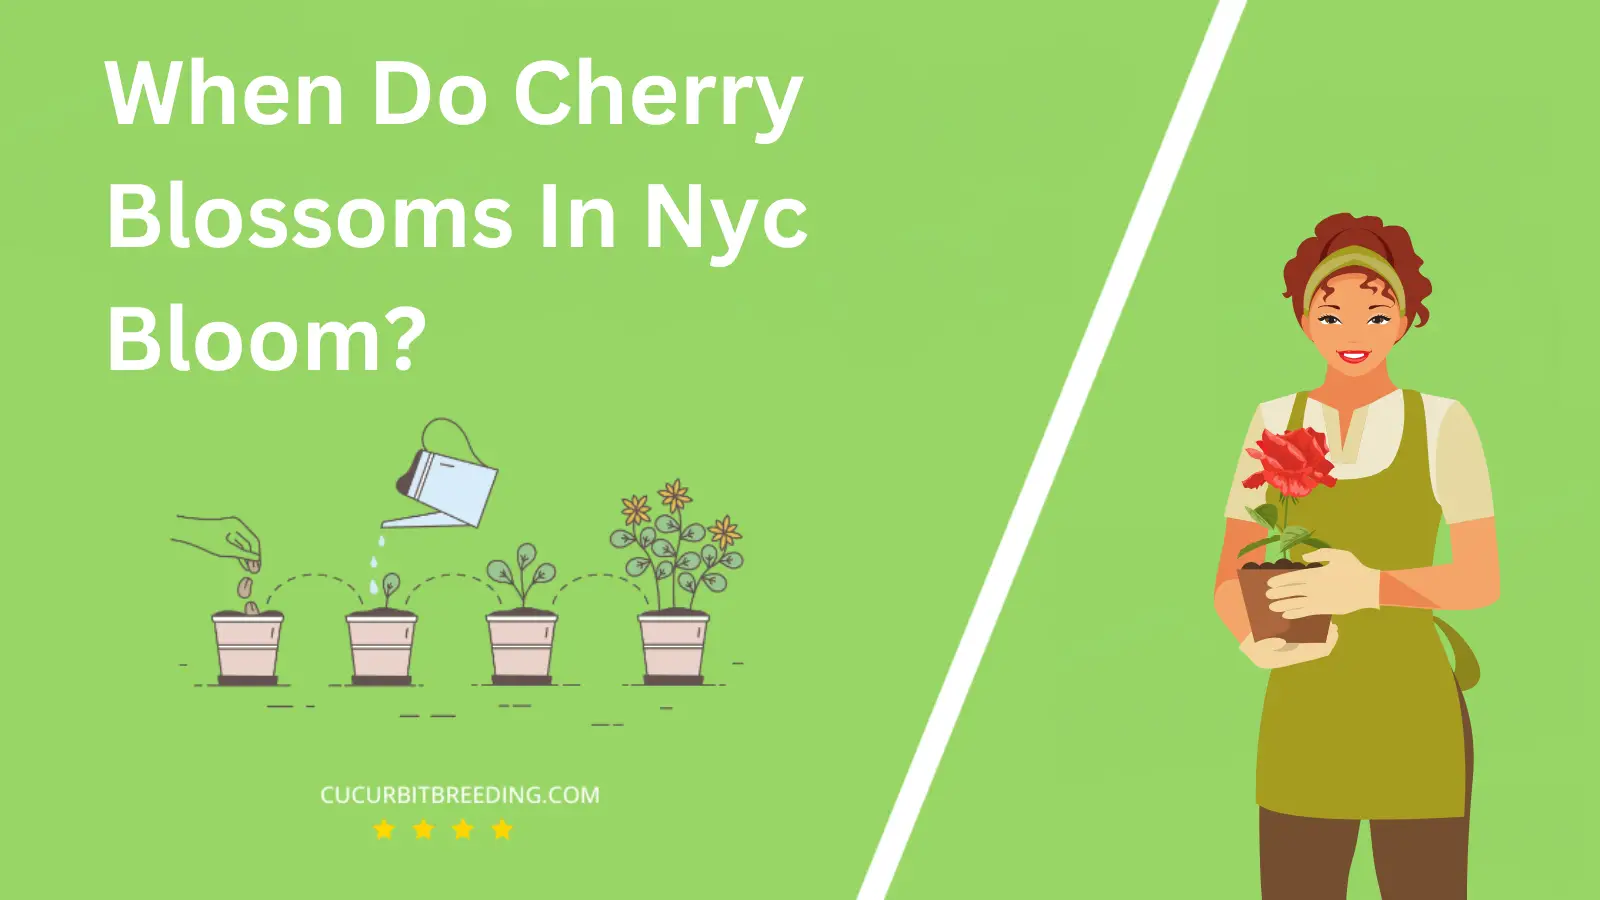 When Do Cherry Blossoms In Nyc Bloom?